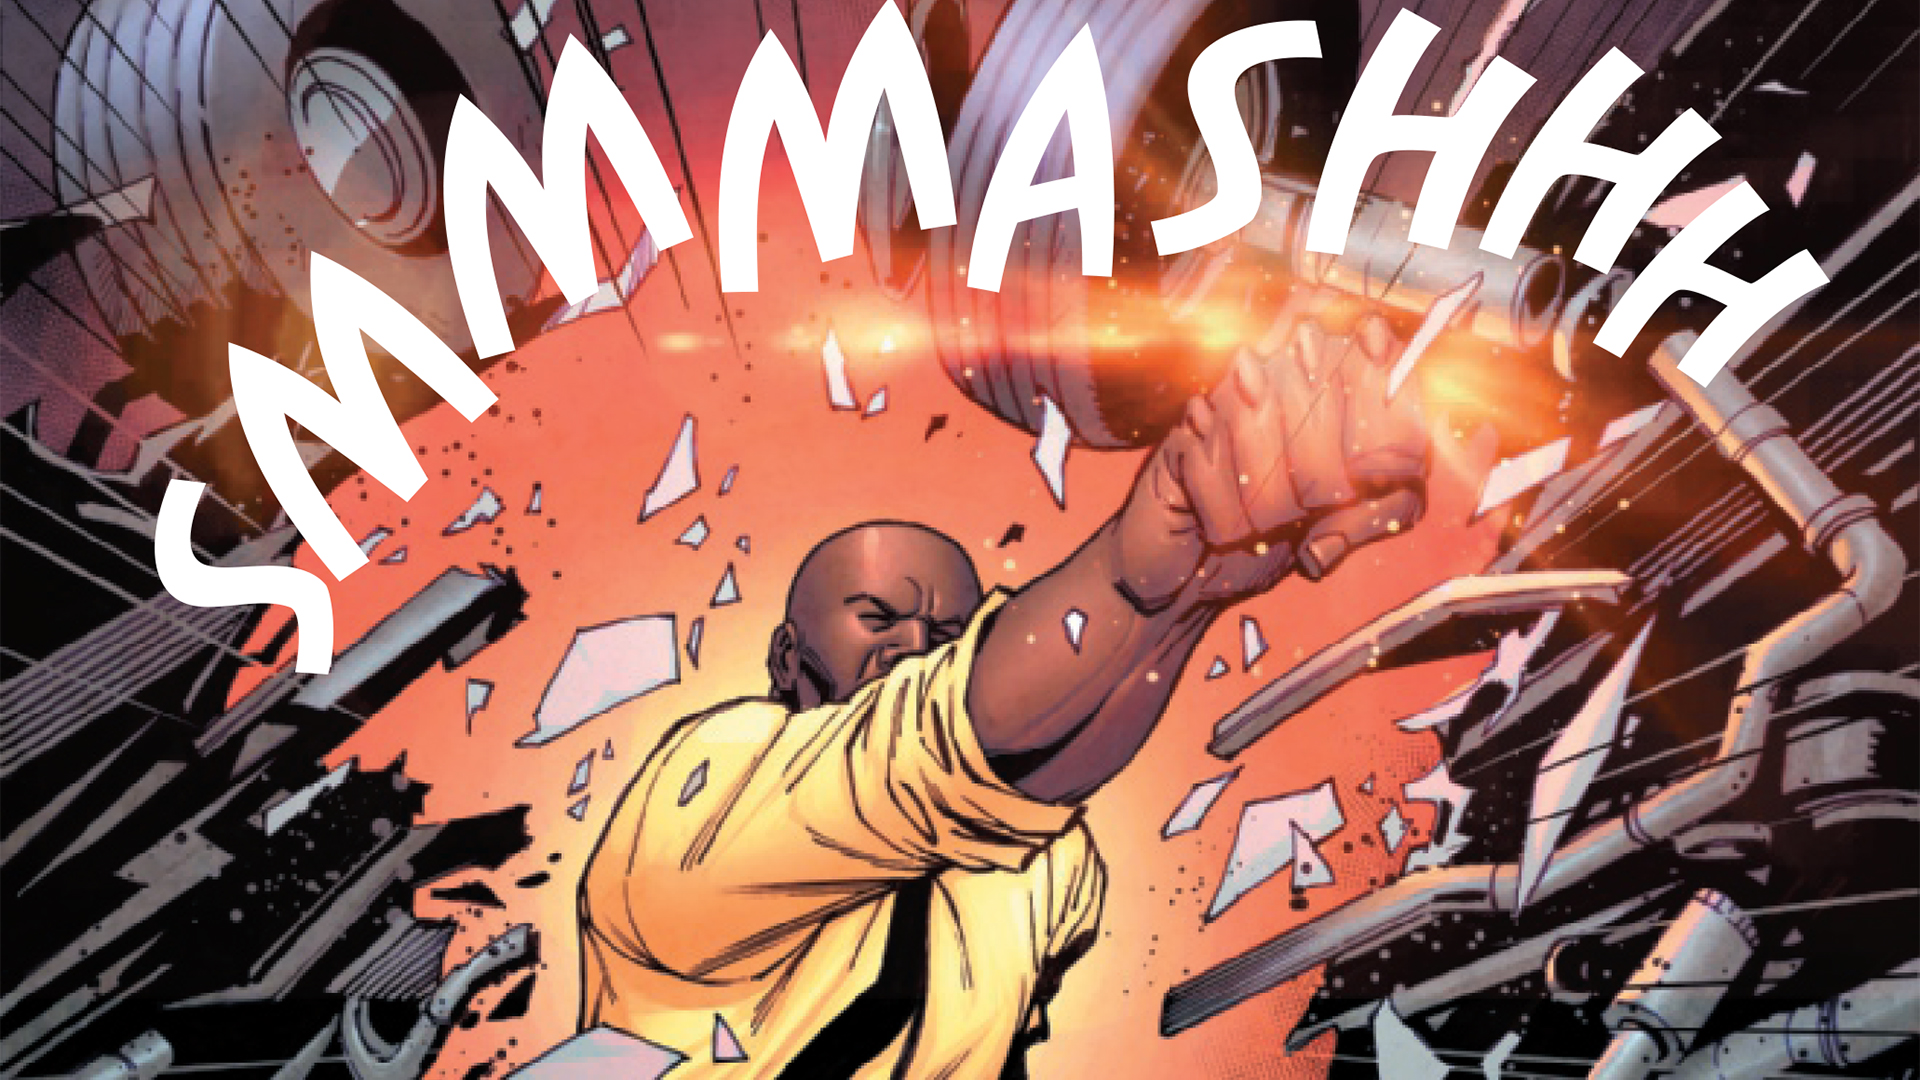 Mayor Cage will have to break New York City’s anti-superhero laws in Luke Cage: Gang War #1